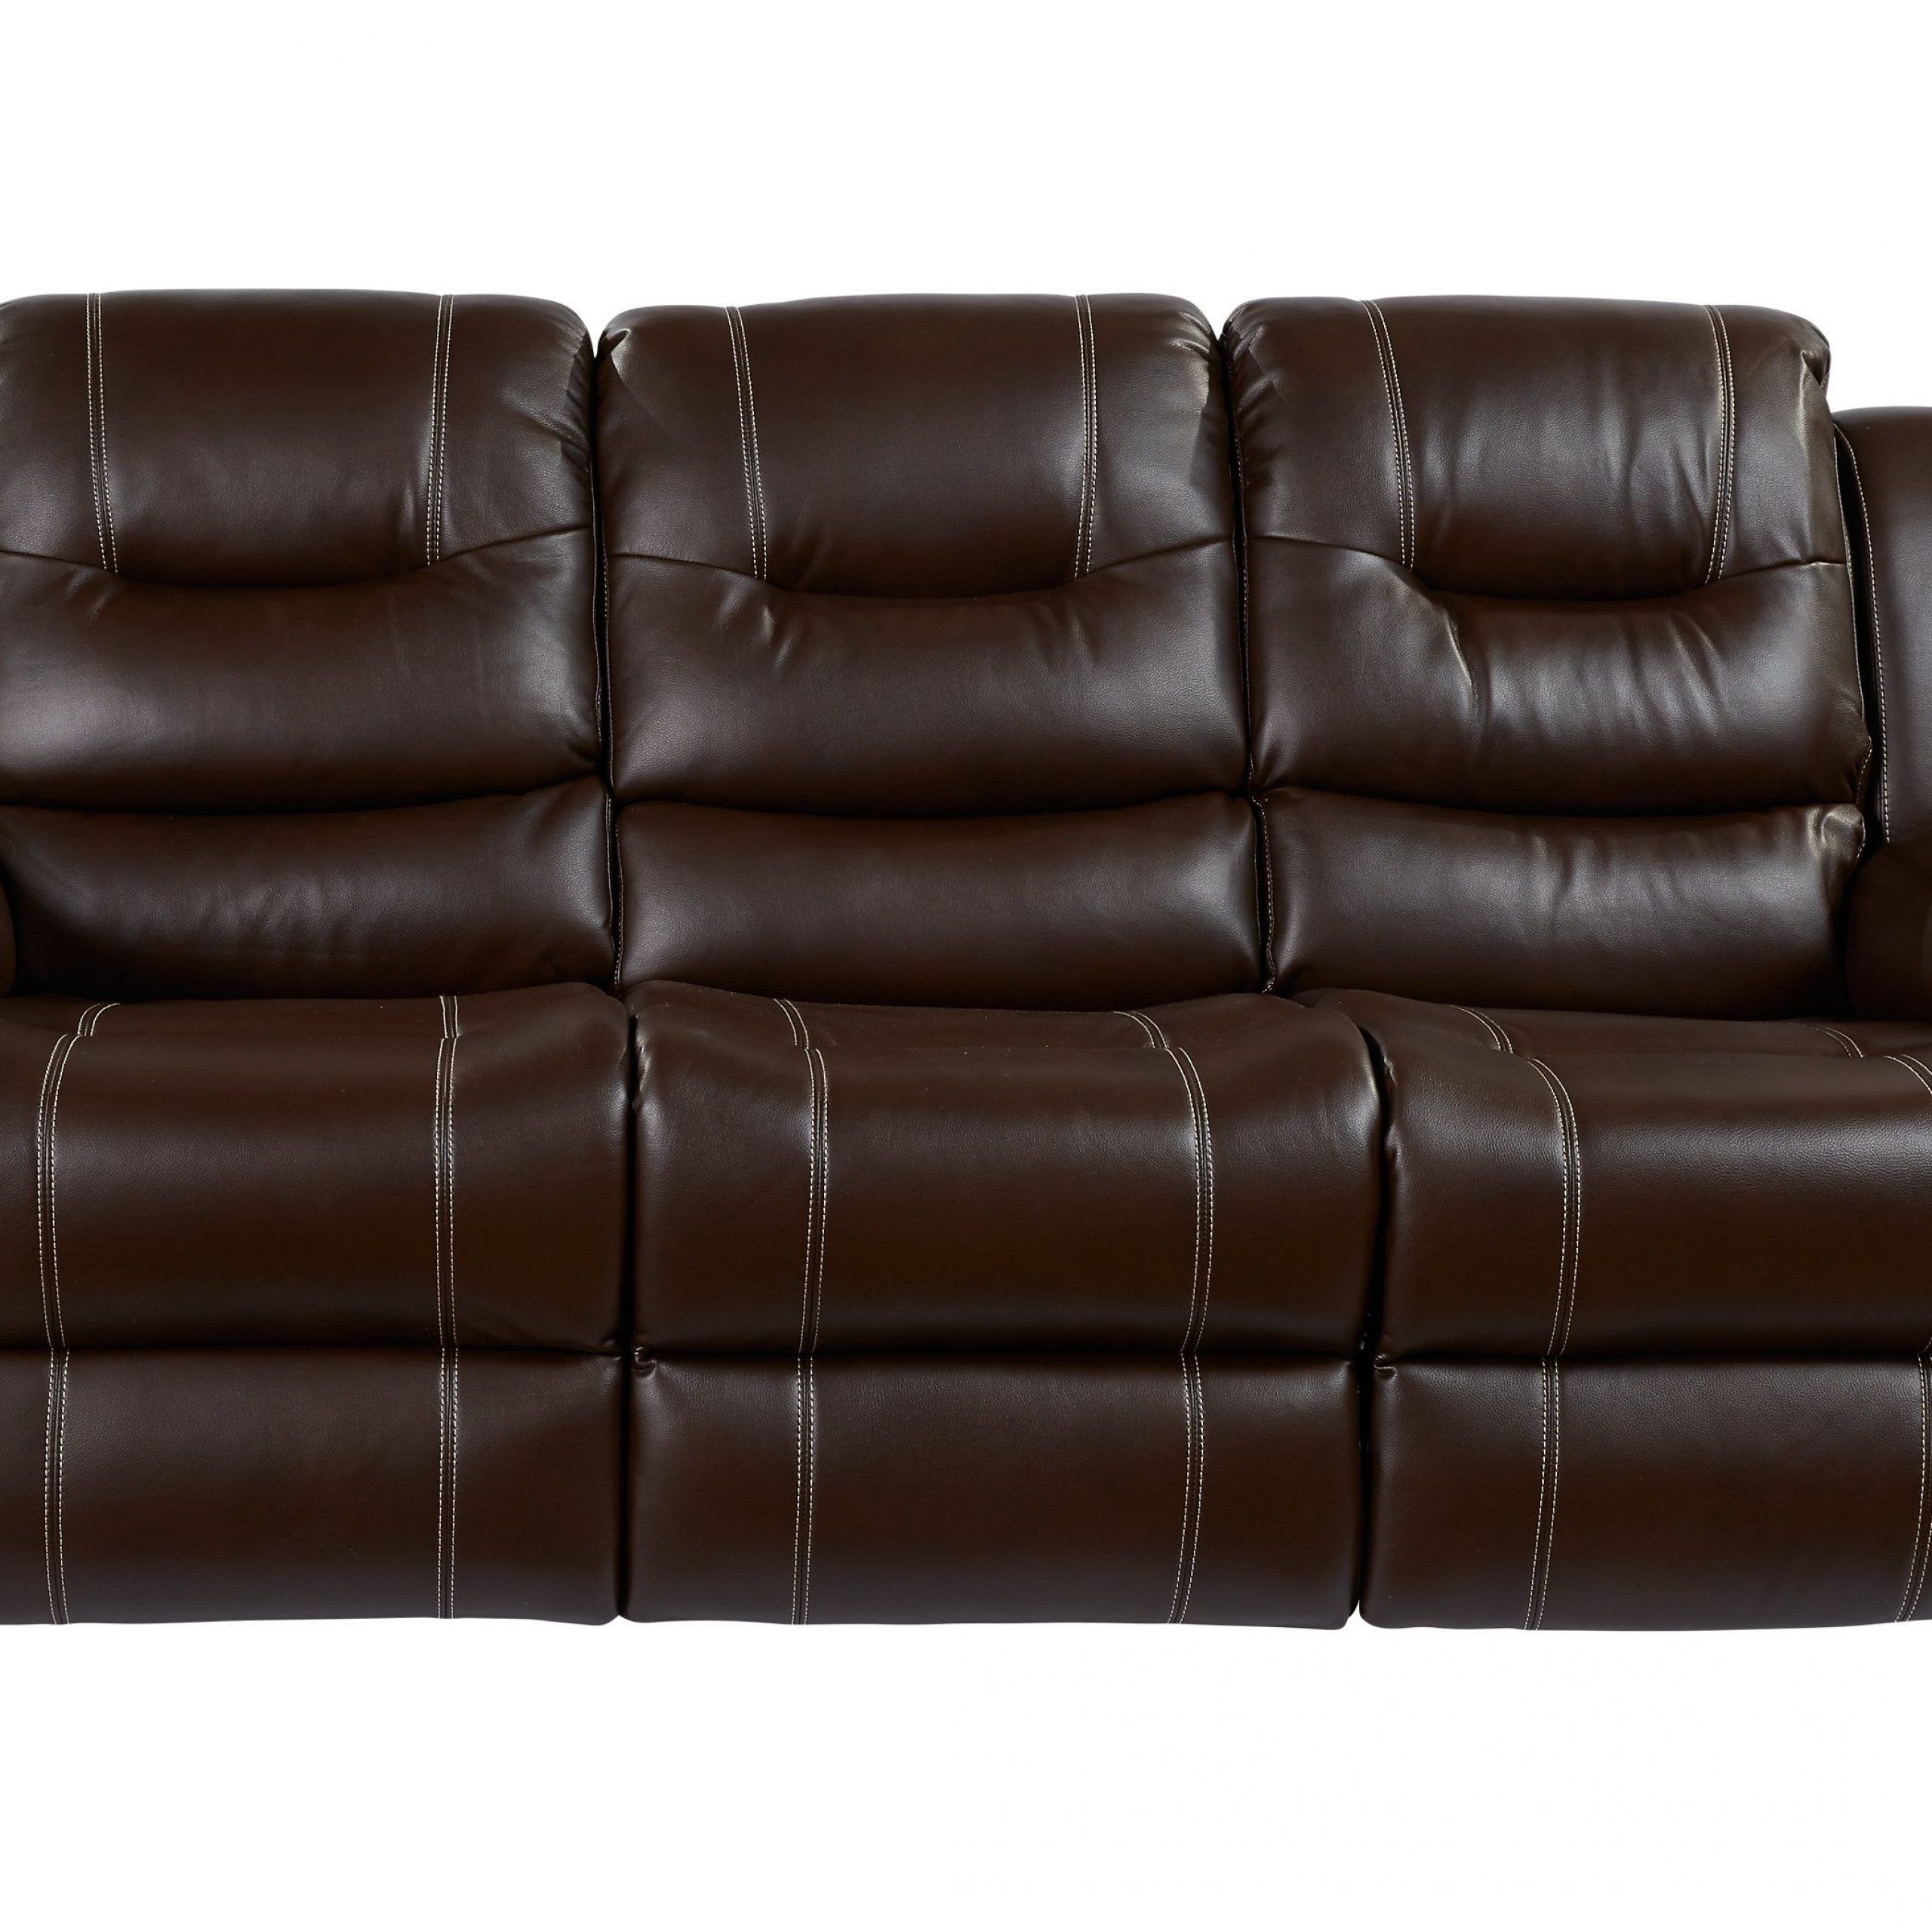 Brown Leather Sofa Living Room, Reclining Sofa, Affordable Throughout Marco Leather Power Reclining Sofas (View 7 of 15)